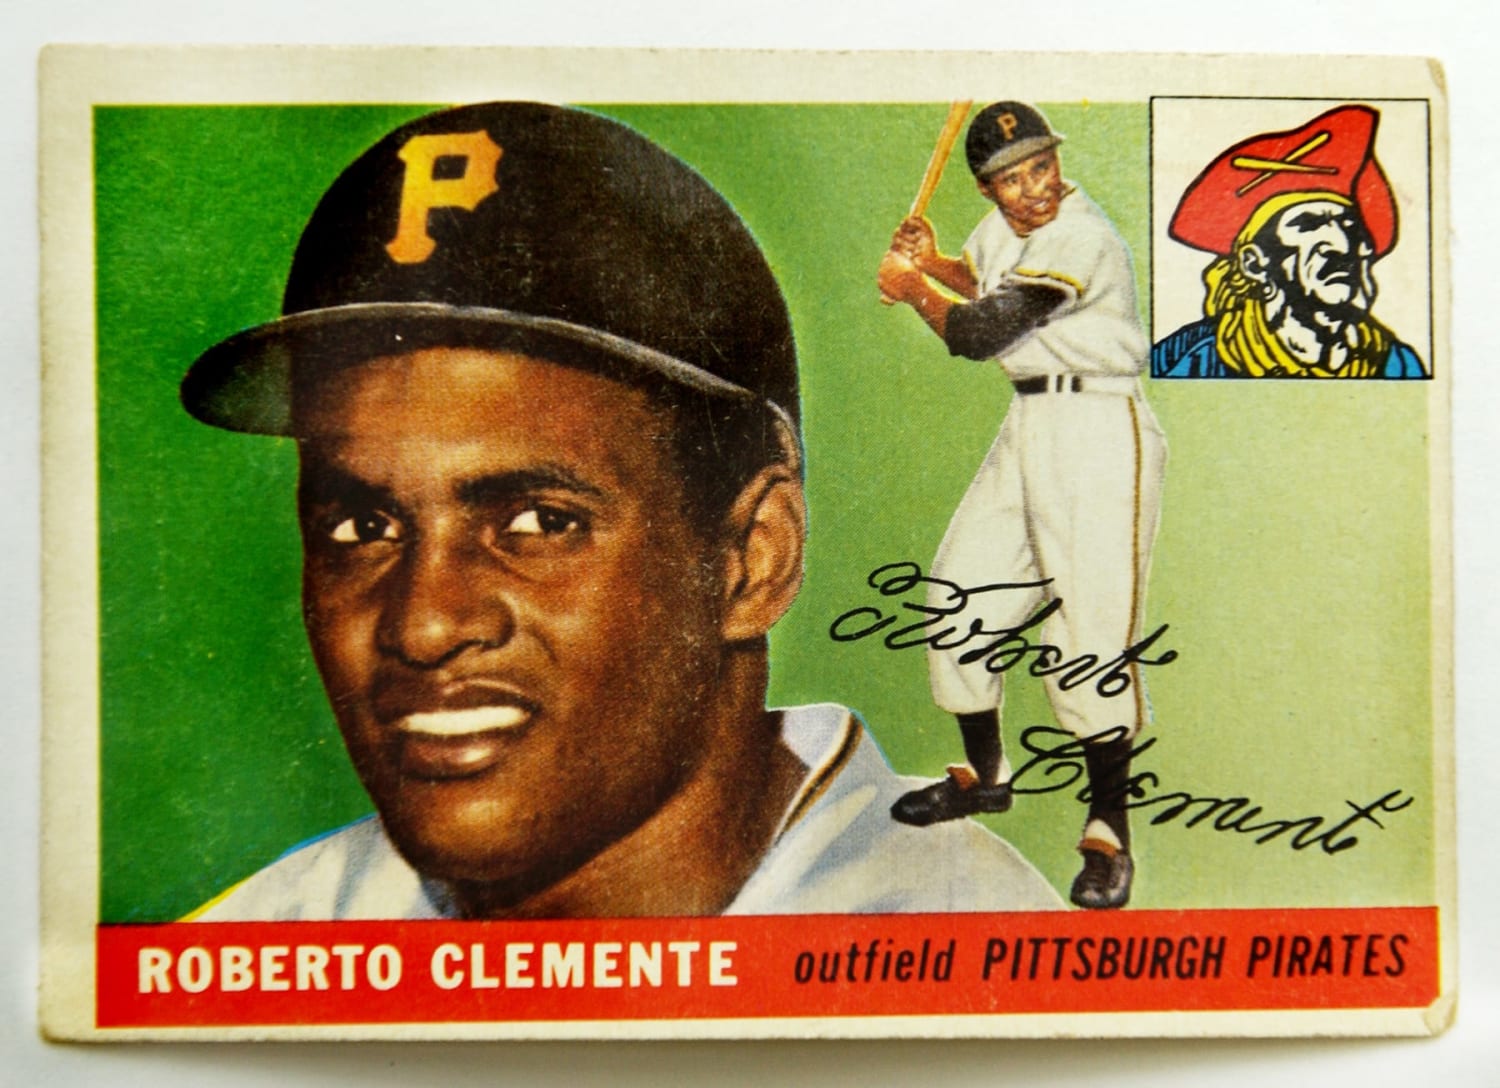 Roberto Clemente, Pirates, outfield, baseball card Greeting Card